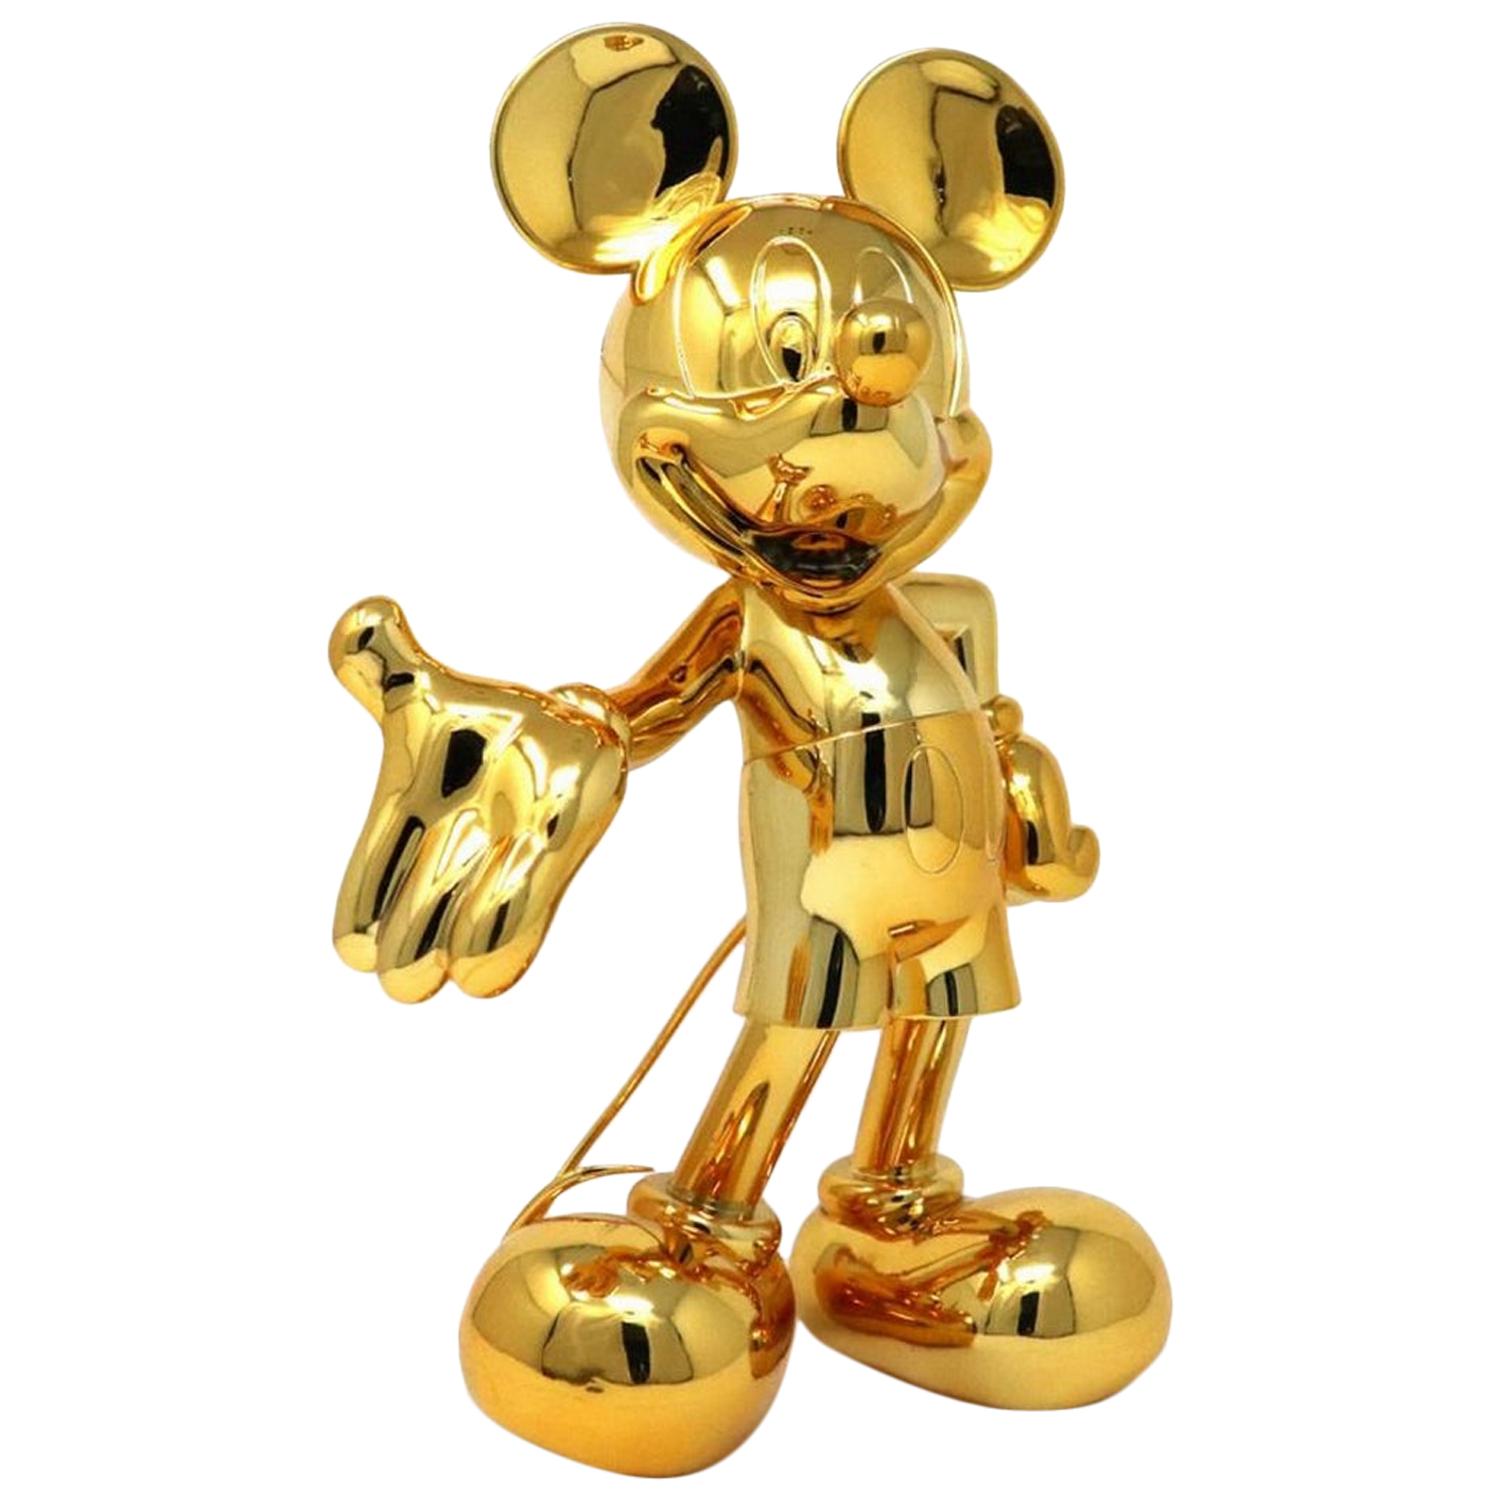 In Stock in Los Angeles, Mickey Mouse Gold Metallic, Pop Sculpture Figurine